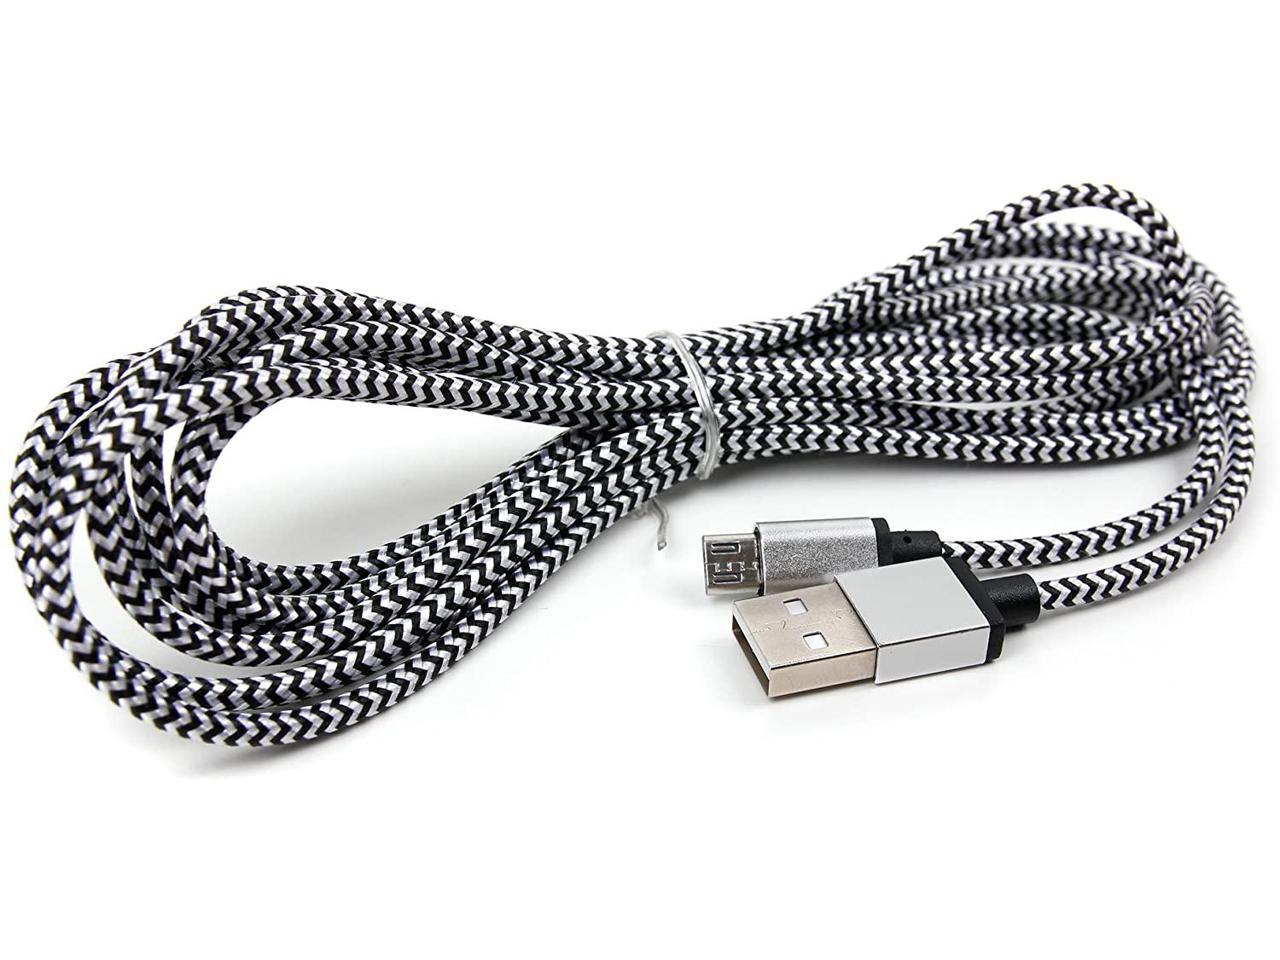 A1 Smartphone Compatible with Gionee A1 Plus DURAGADGET Braided Silver Nylon 3M Micro USB Cable 